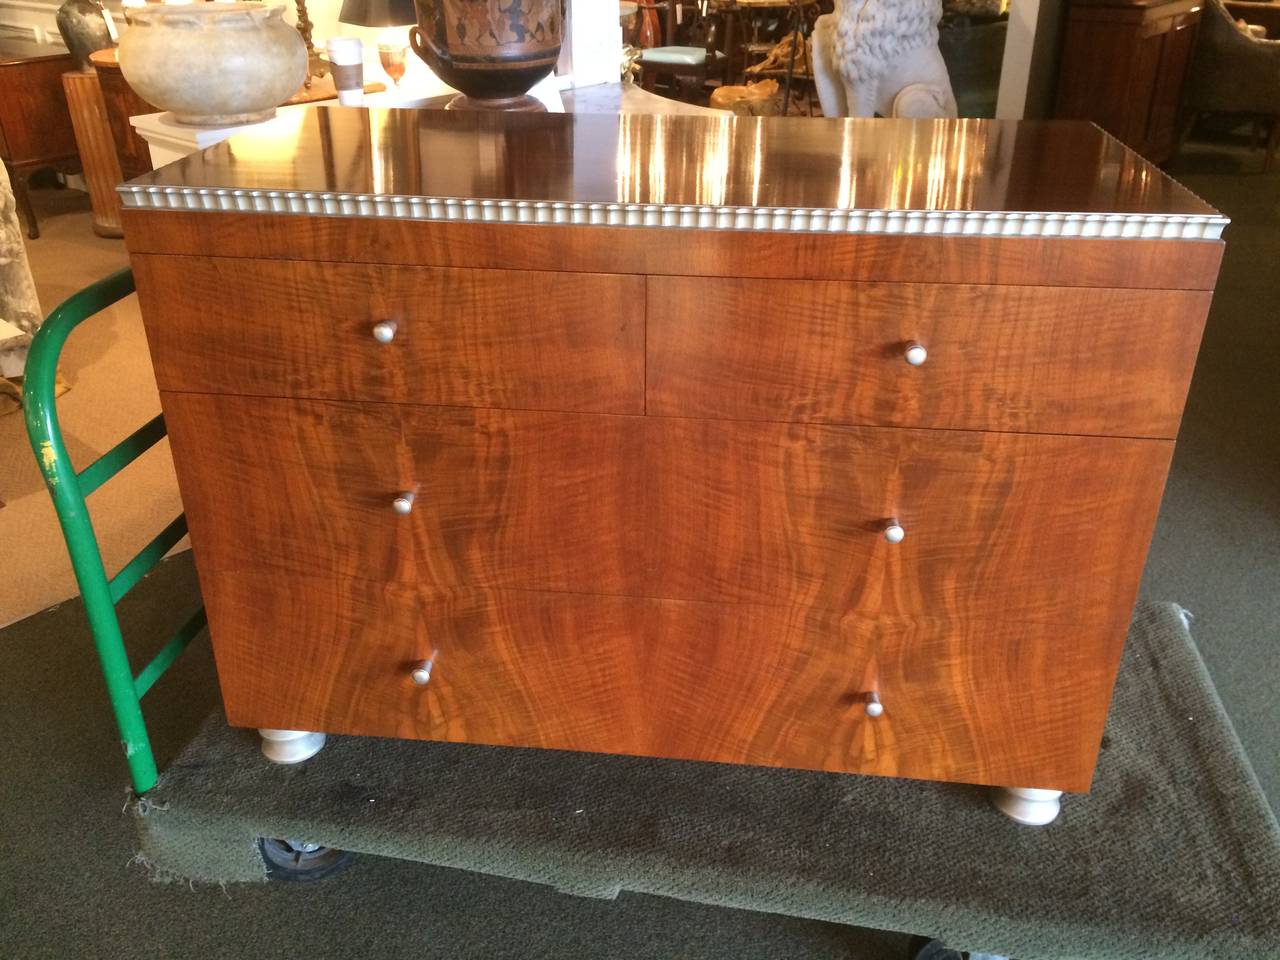 American modern figured walnut dresser with silver leaf details. The design by Robert W. Irwin for this suite won first prize in the National designer contest sponsored by the American walnut manufactures association in 1933. 

Entire bedroom